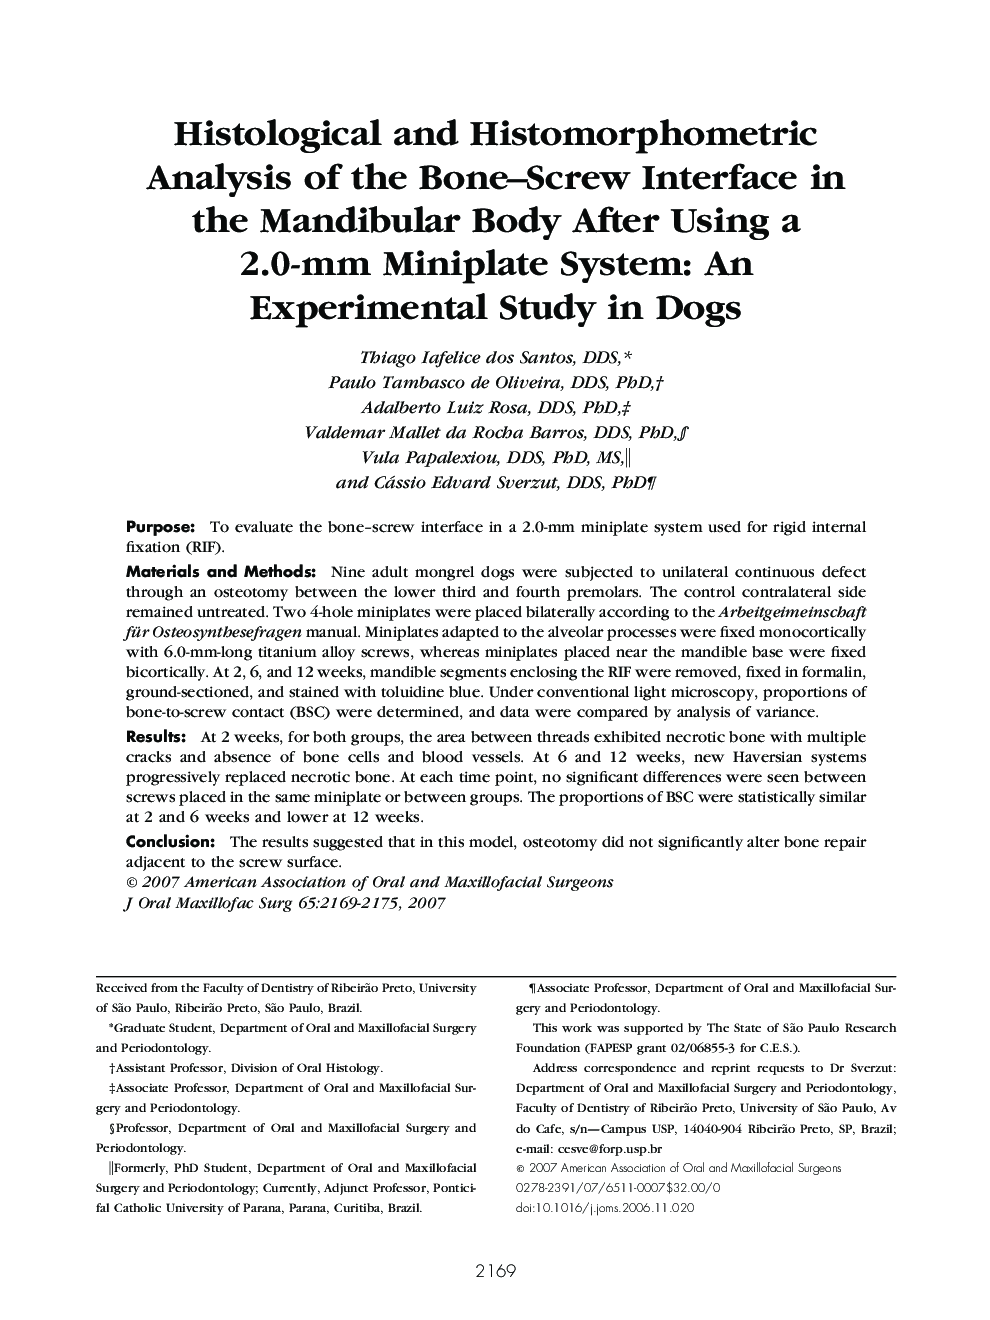 Histological and Histomorphometric Analysis of the Bone-Screw Interface in the Mandibular Body After Using a 2.0-mm Miniplate System: An Experimental Study in Dogs